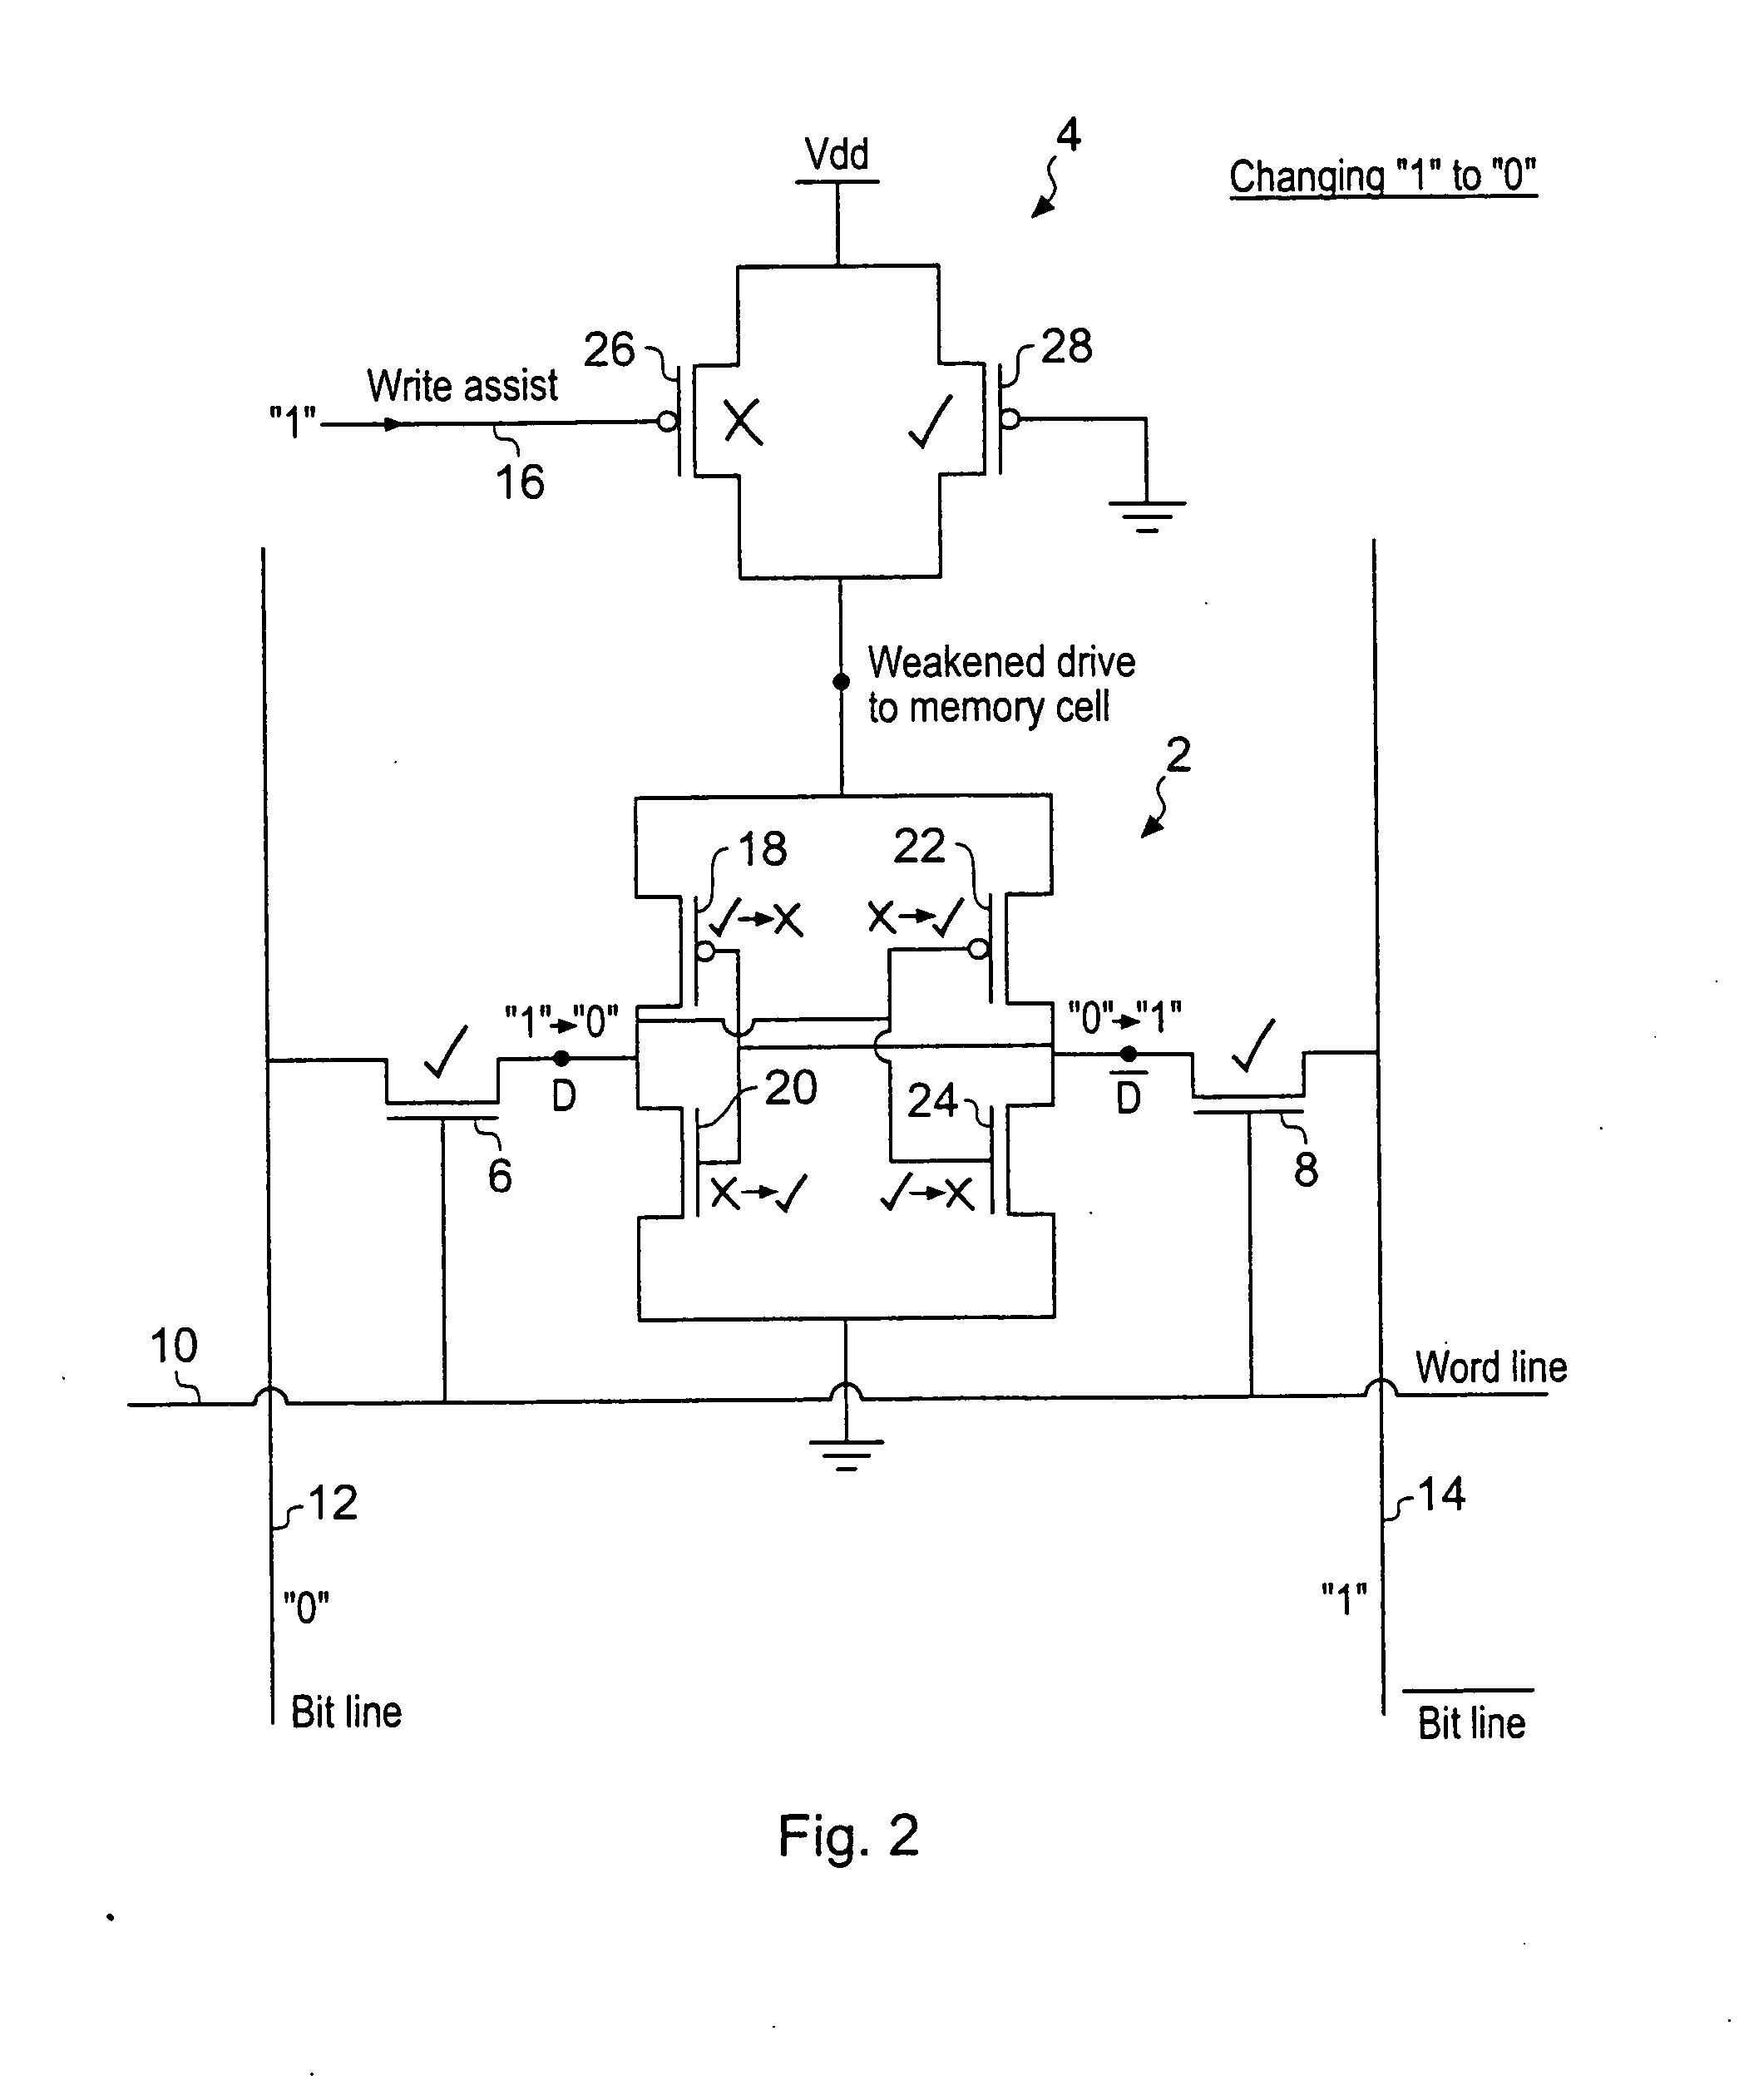 Integrated circuit memory with write assist